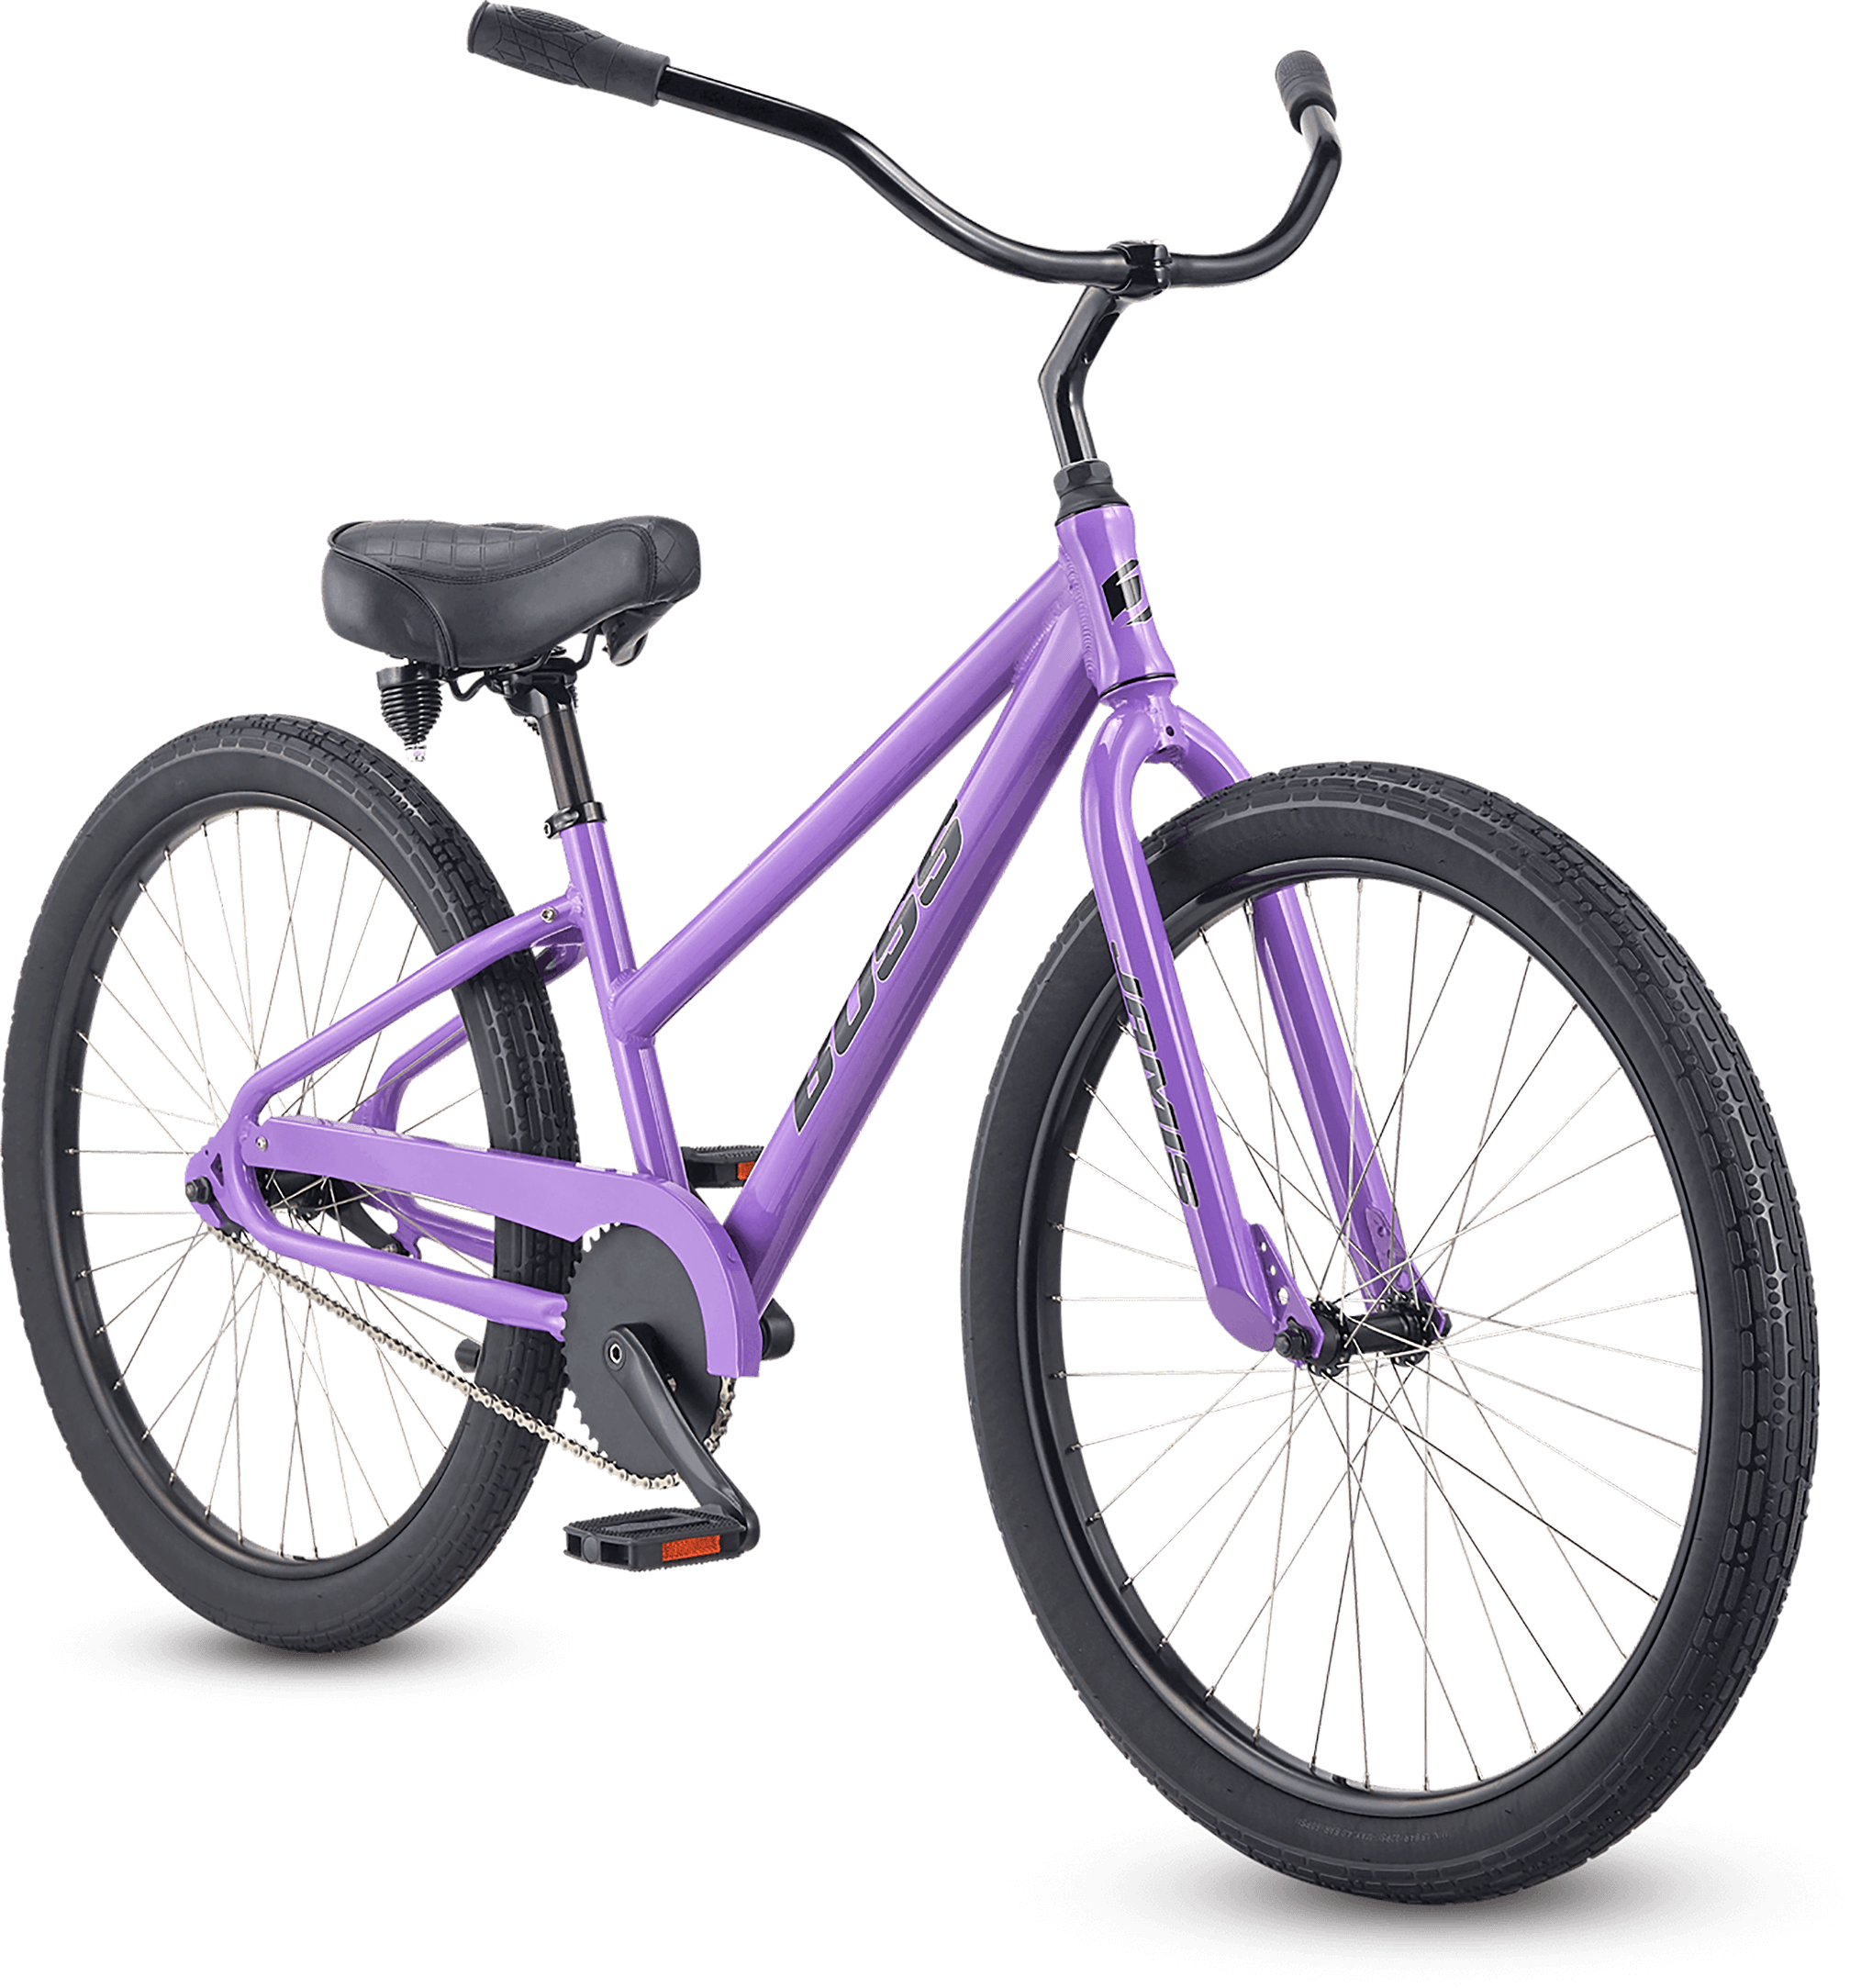 https://www.jamisbikes.com/wp-content/uploads/2020/09/21_angle_f_bcc_stepover_vivid_violet.png